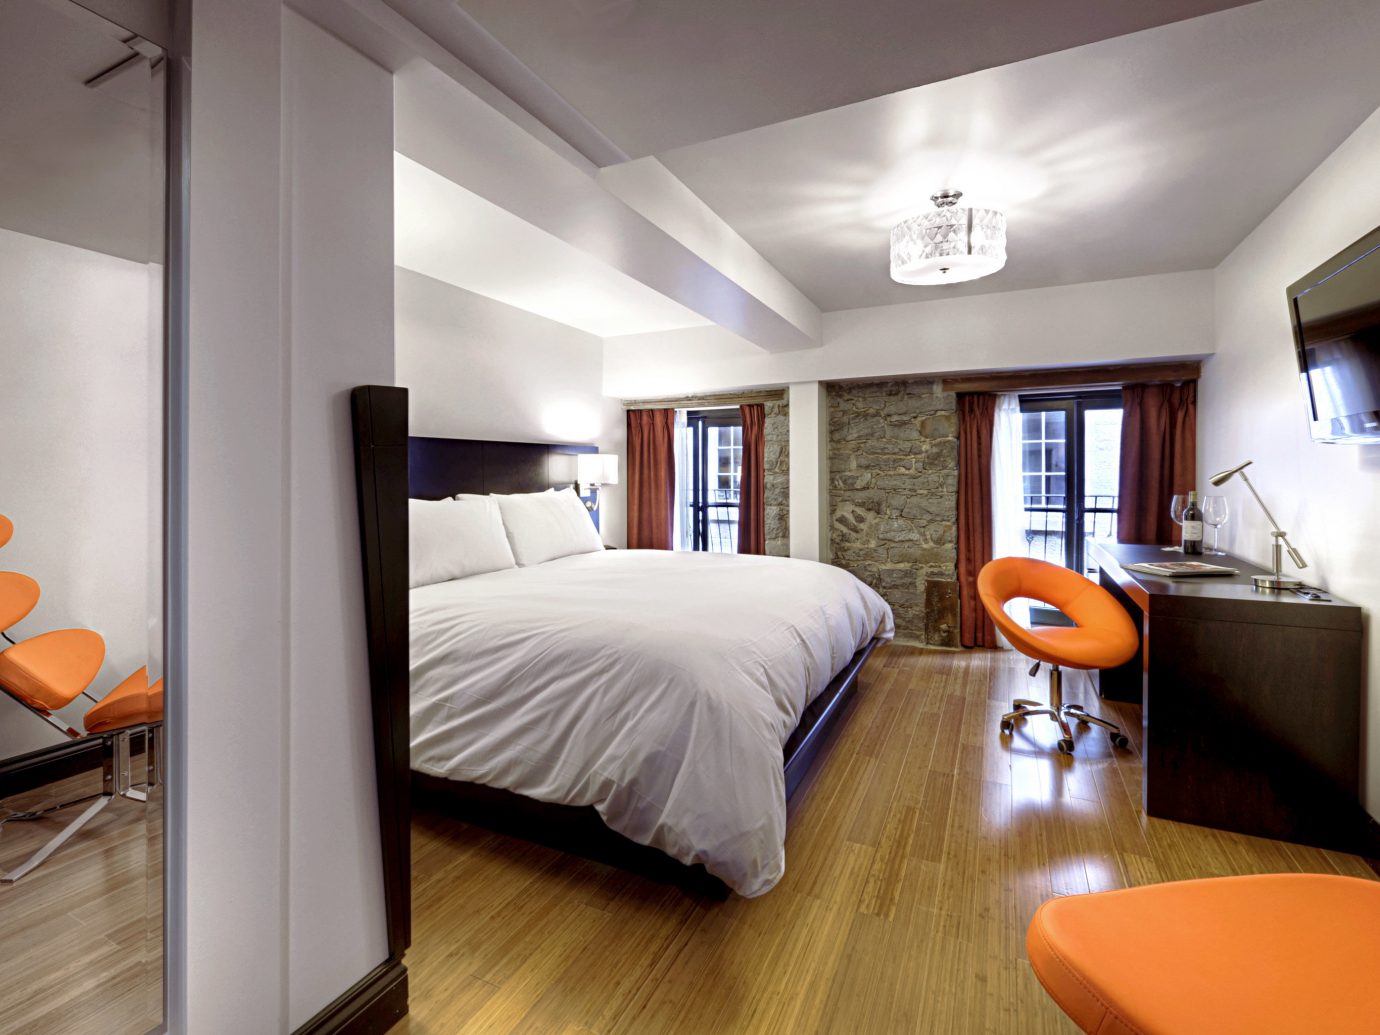 Bedroom Boutique Hotels Business Chicago Hotels Luxury Modern Scenic views Suite indoor floor wall ceiling room property bed real estate home estate interior design living room orange cottage wood condominium apartment furniture